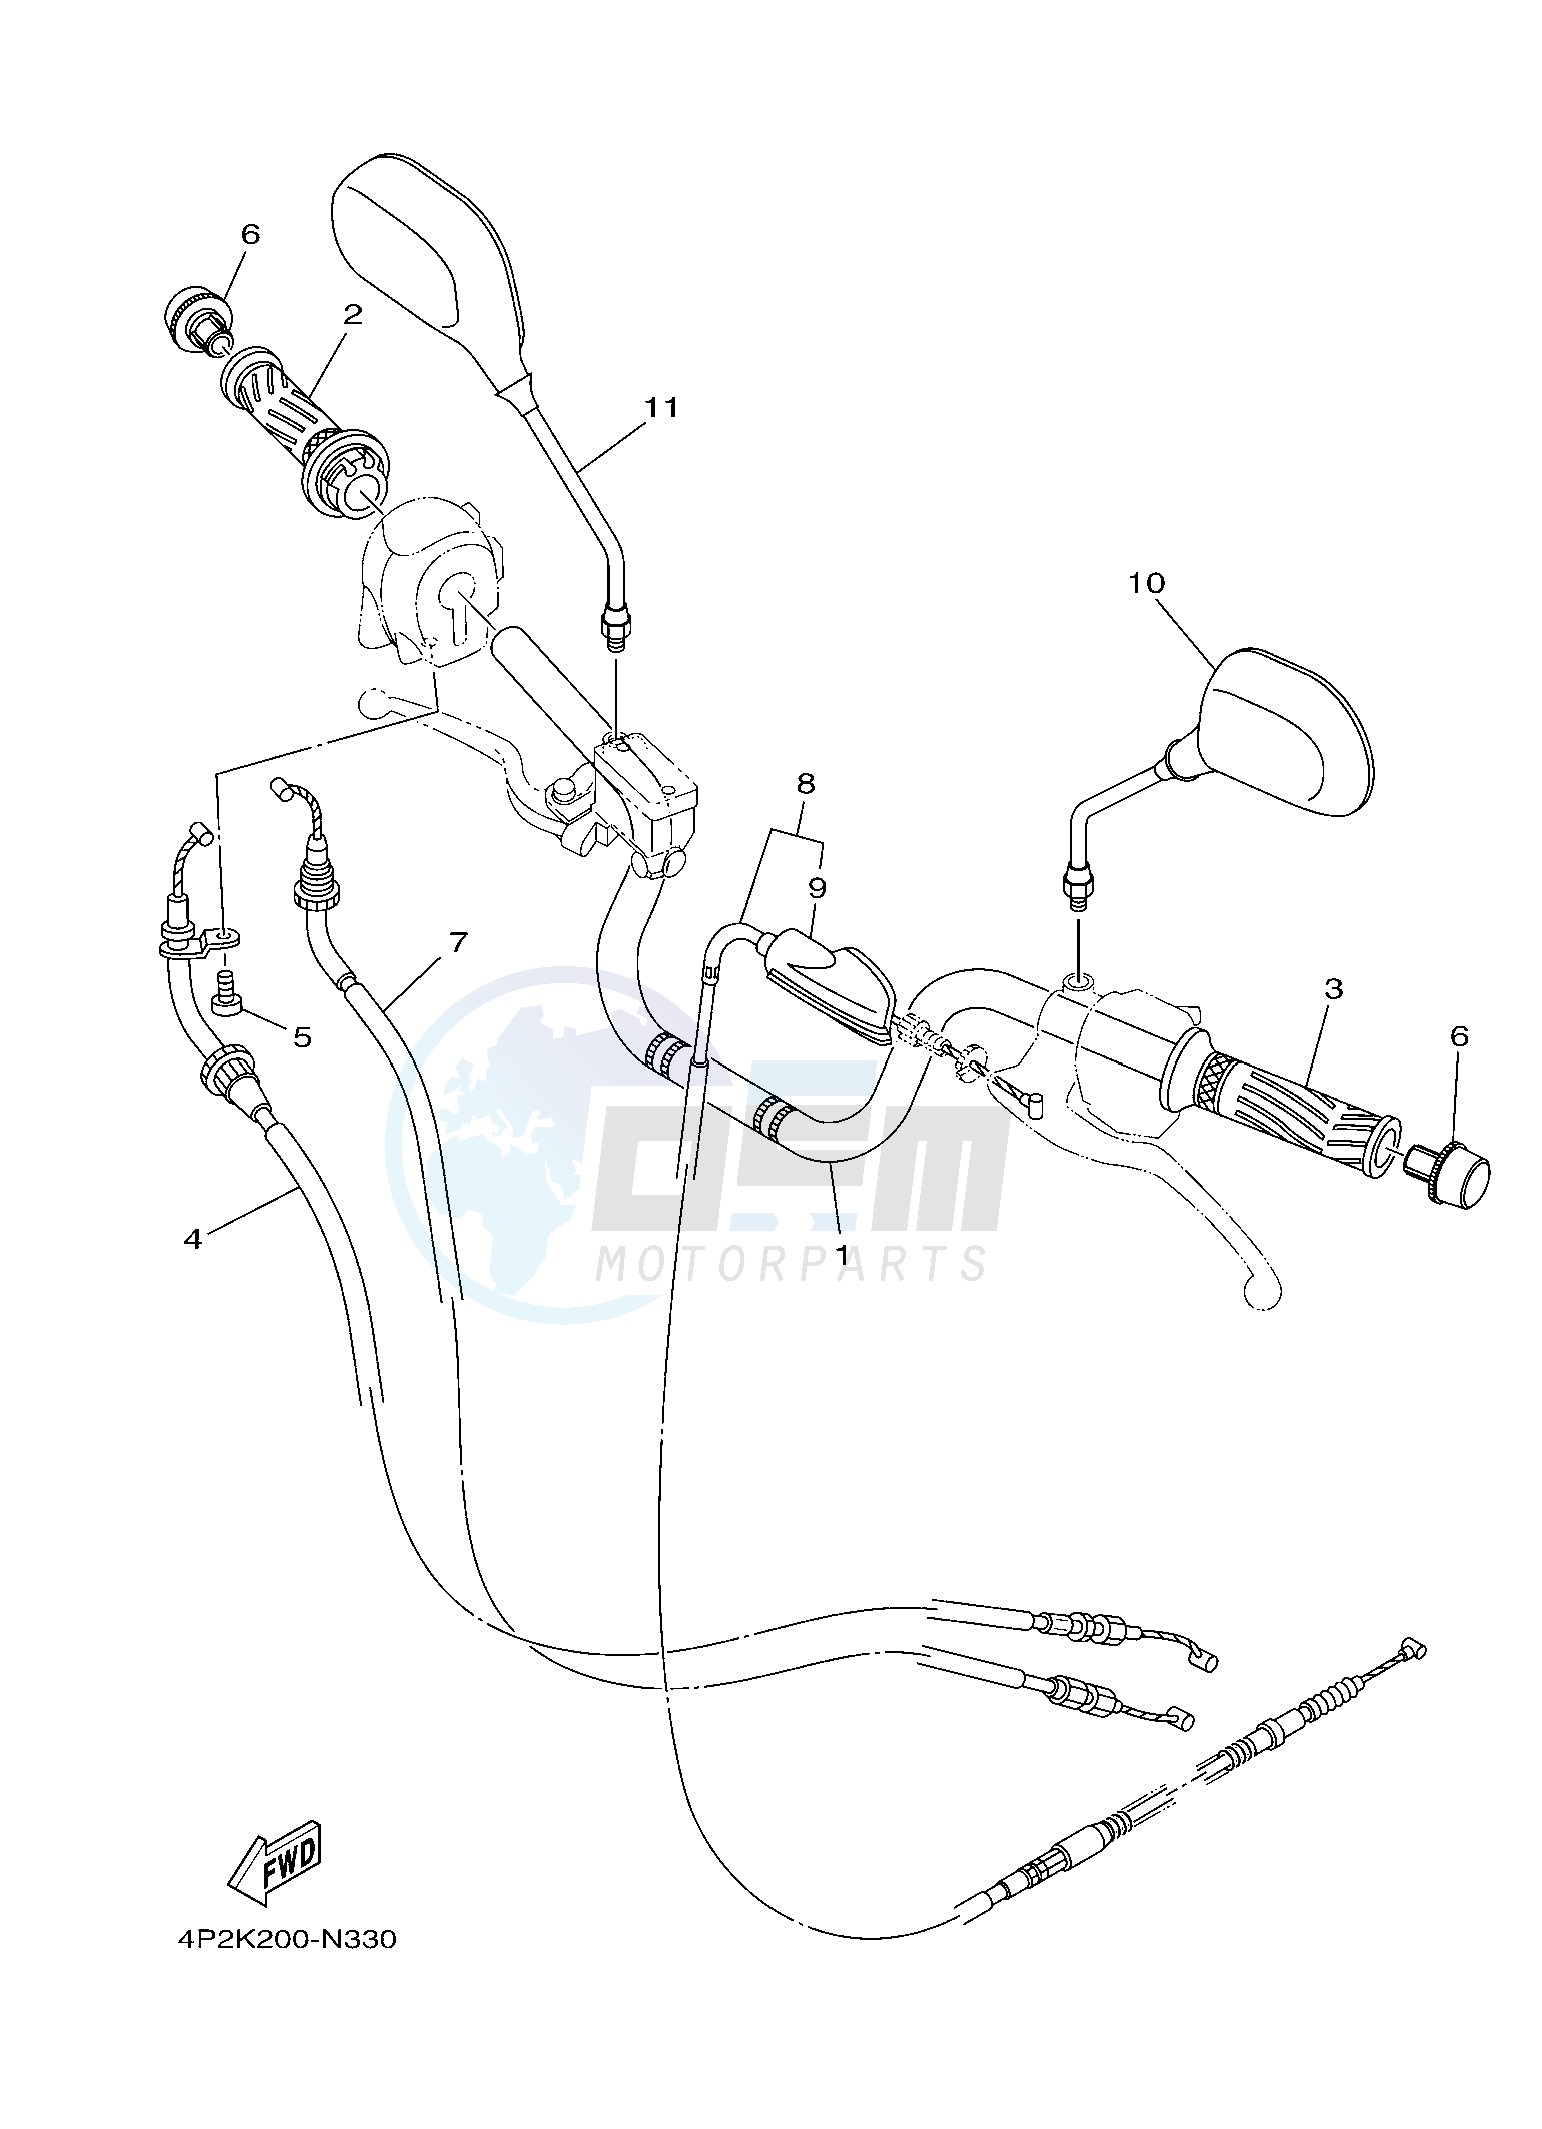 STEERING HANDLE & CABLE 2 blueprint